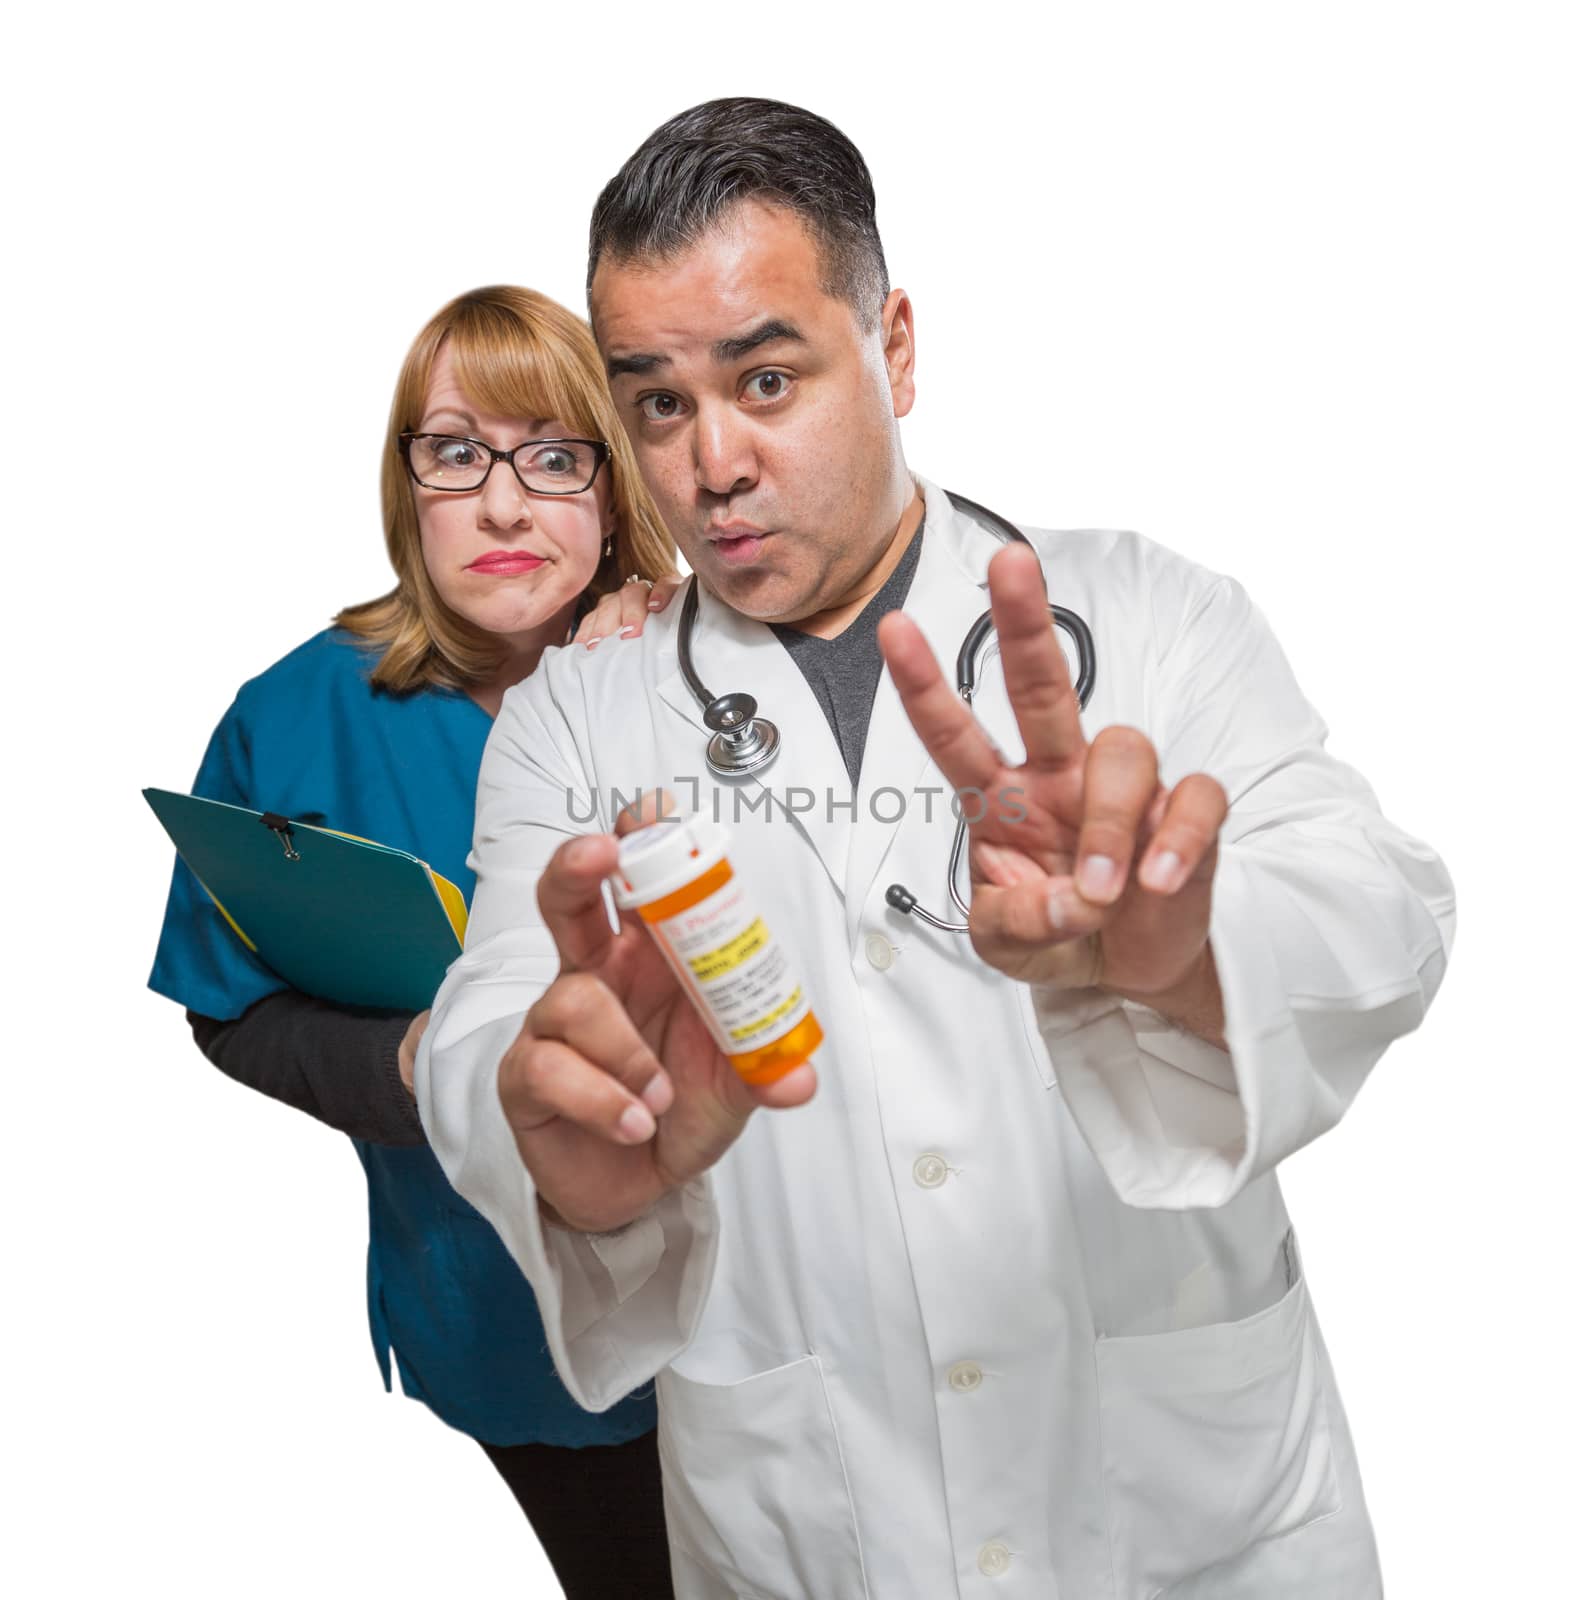 Goofy Doctor and Nurse with Prescription Bottle Isolated on a White Background by Feverpitched